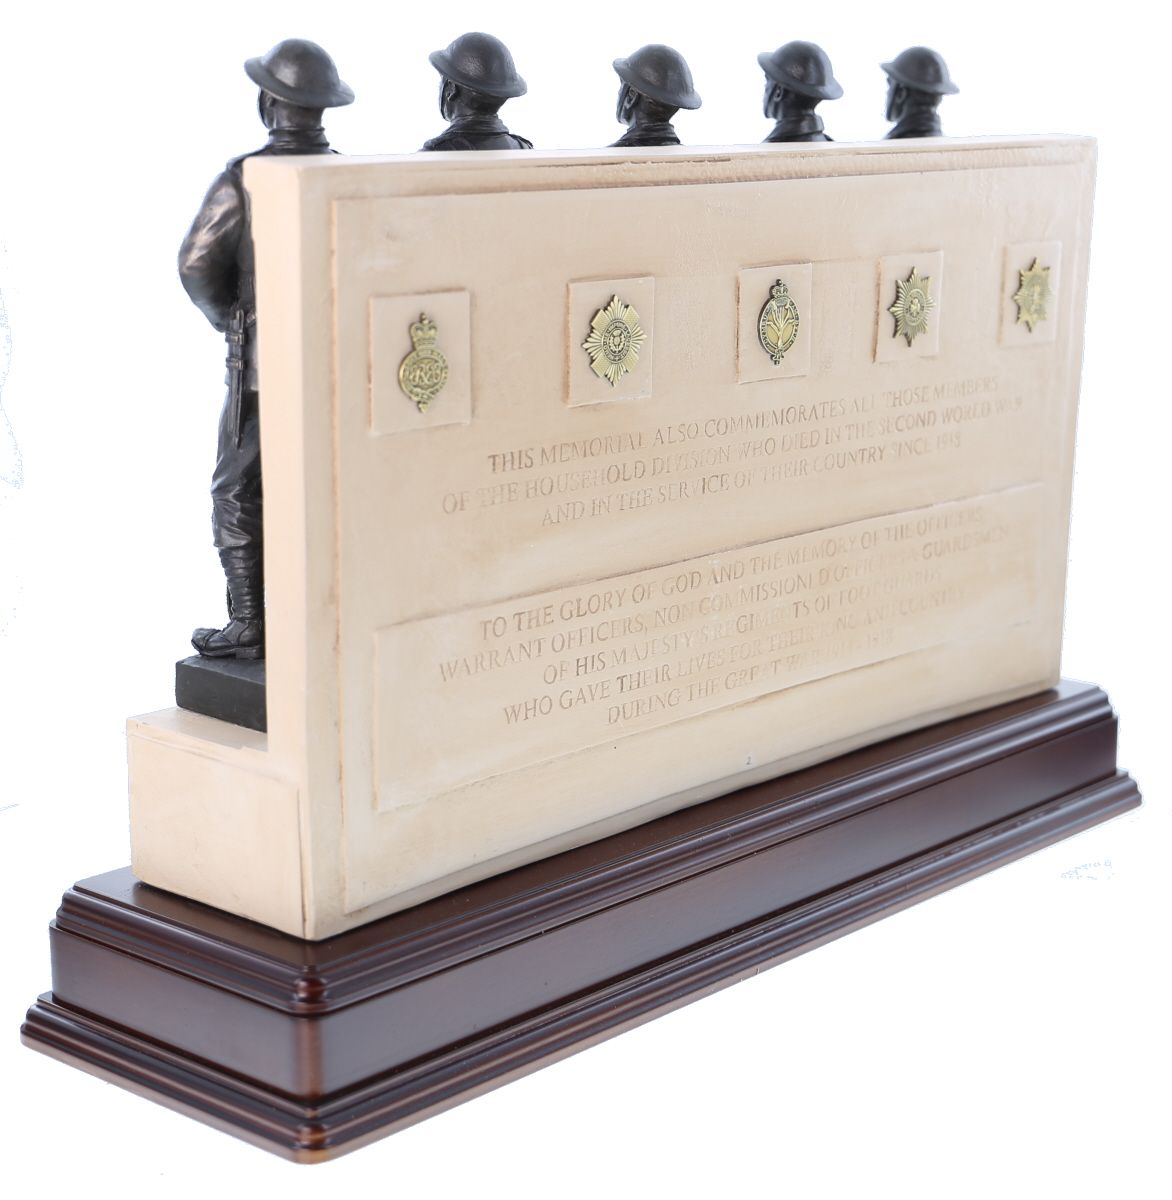 The Guards Memorial Statuette - An excellently sculptured statuette of the life-sized Guards' Memorial